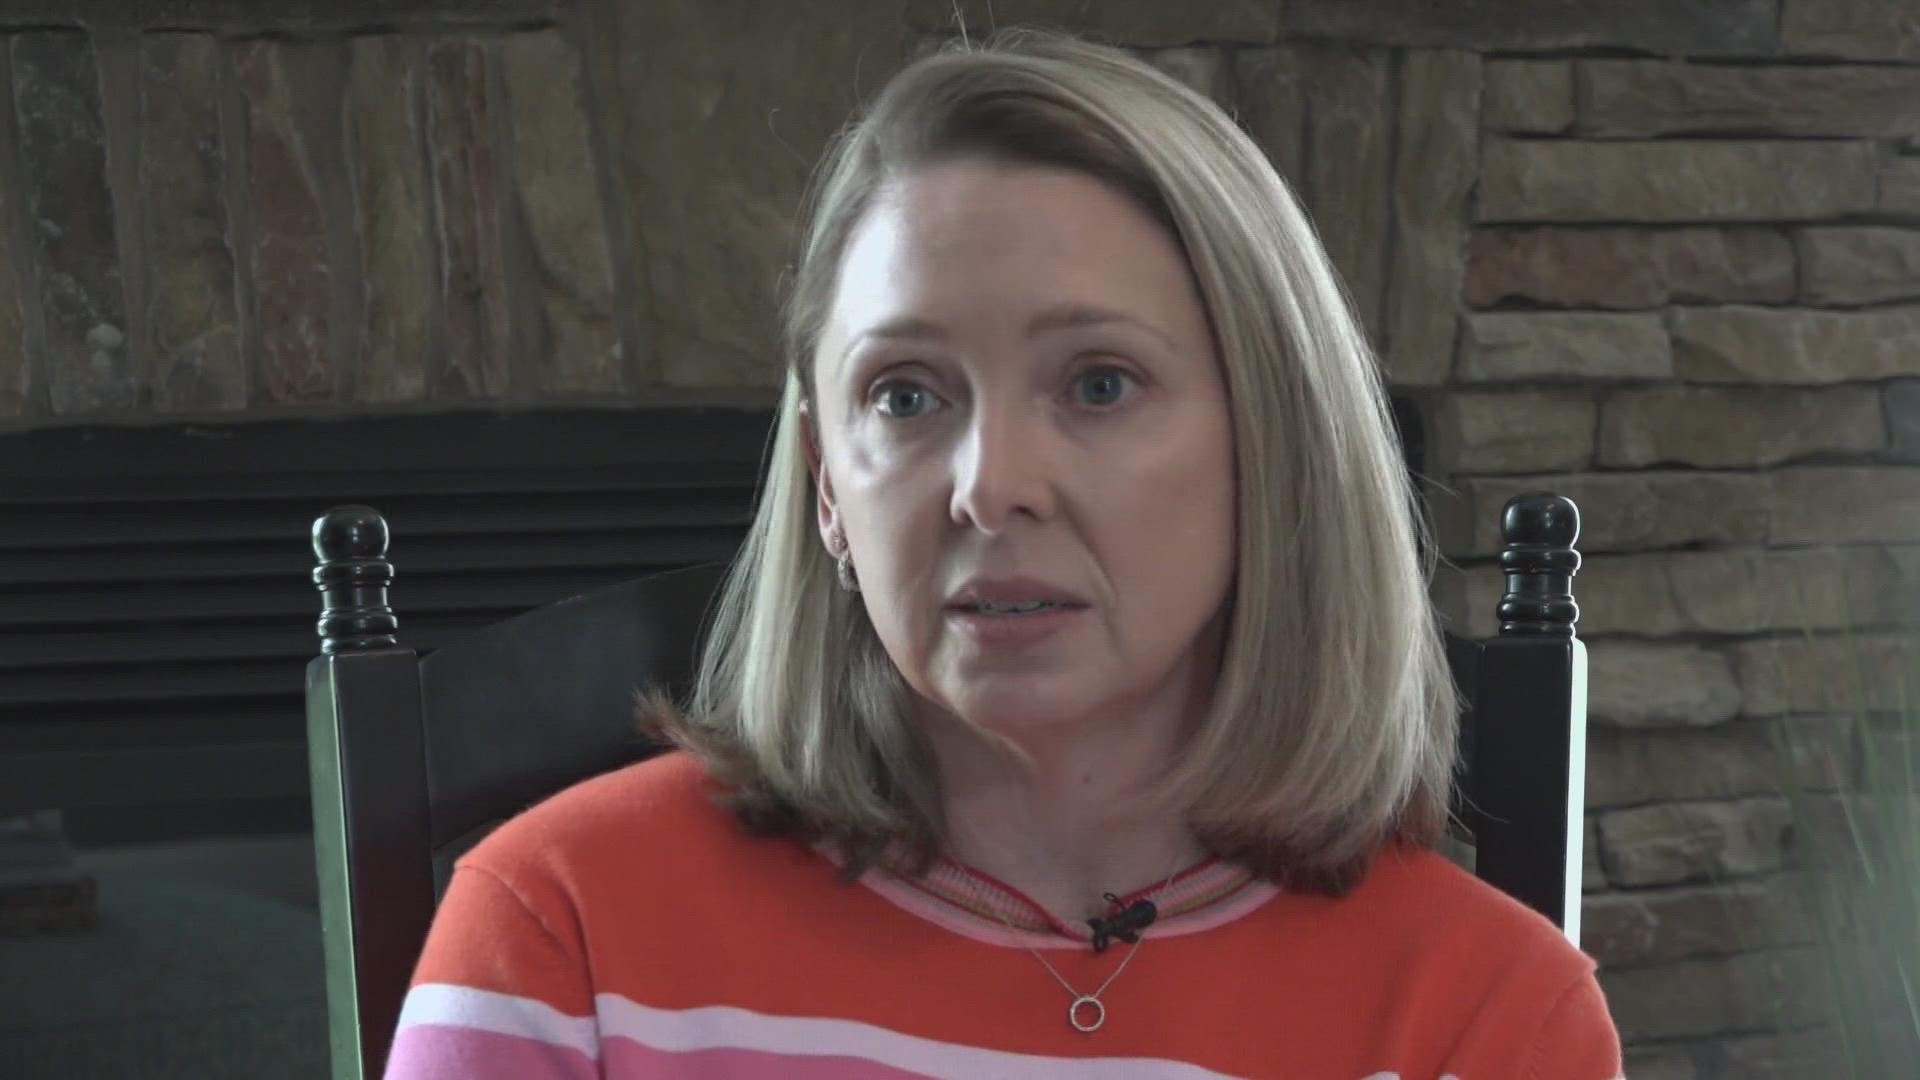 Jennifer Beane was set to get a colonoscopy last February. When she learned her insurance company wouldn't cover the cost, she contacted 2 Wants to Know for help.